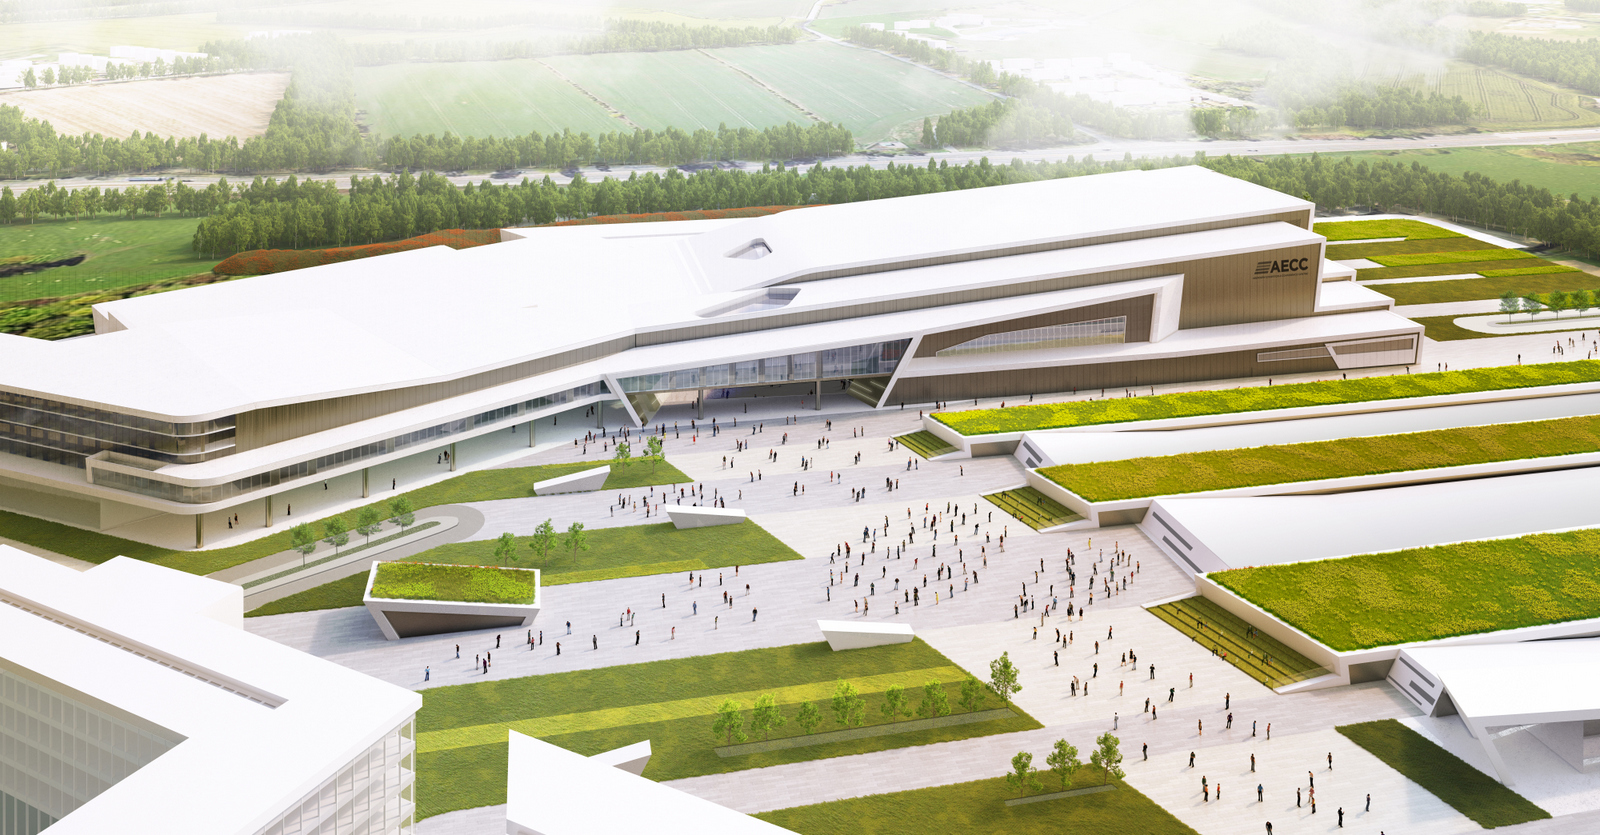 Artist impression of the new plans for Aberdeen Exhibition and Conference Centre